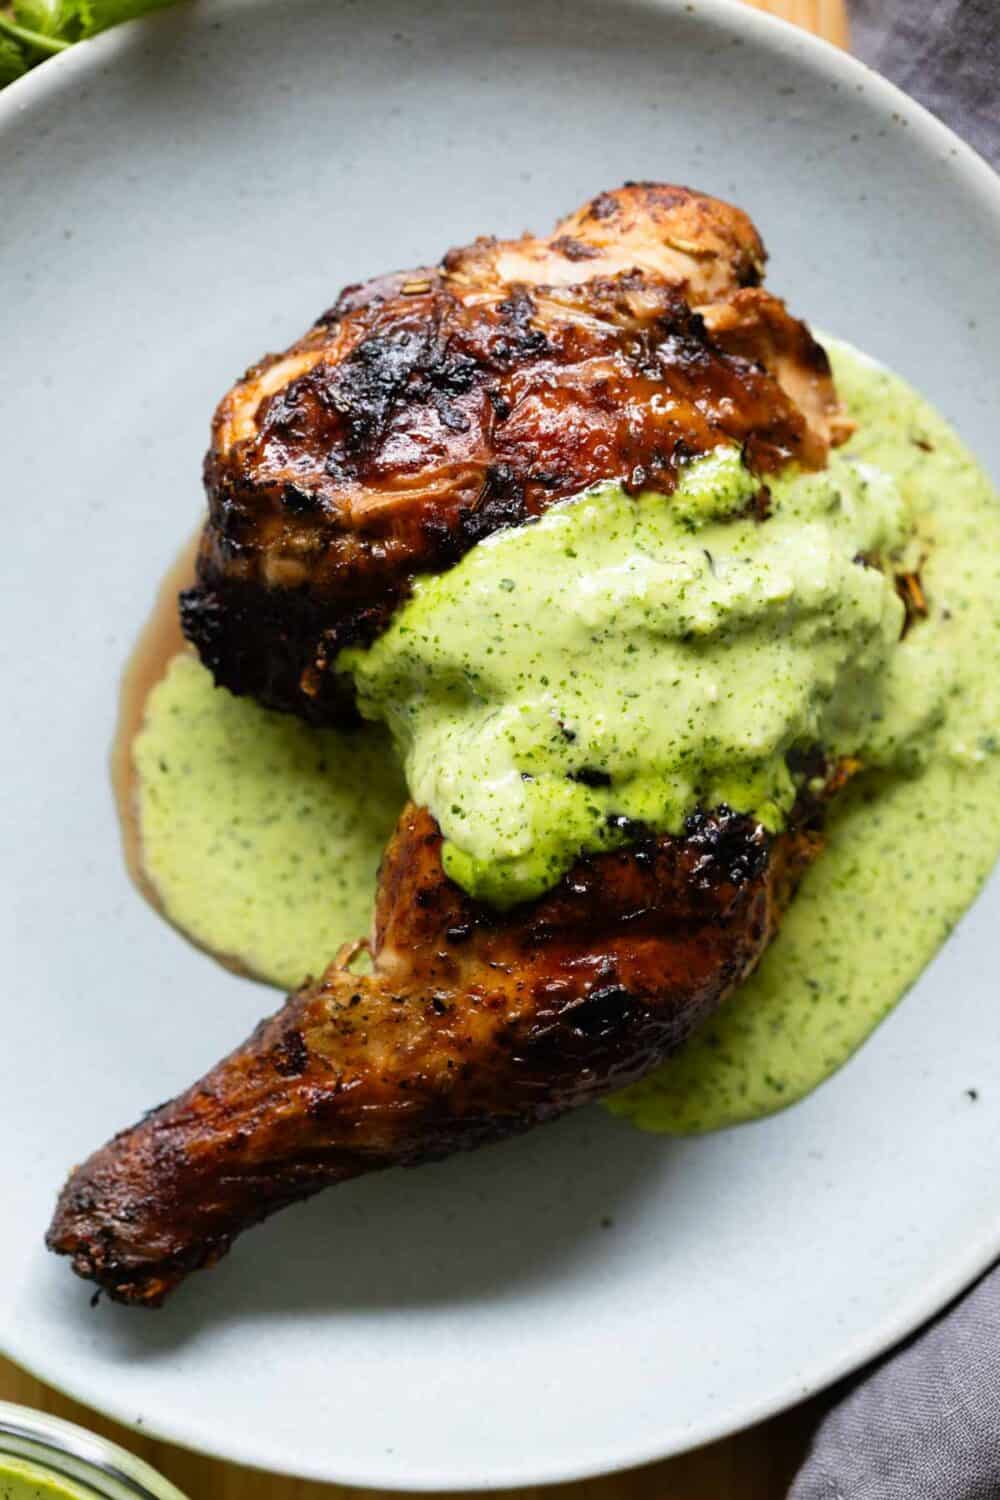 Grilled chicken leg with ají verde sauce on top.